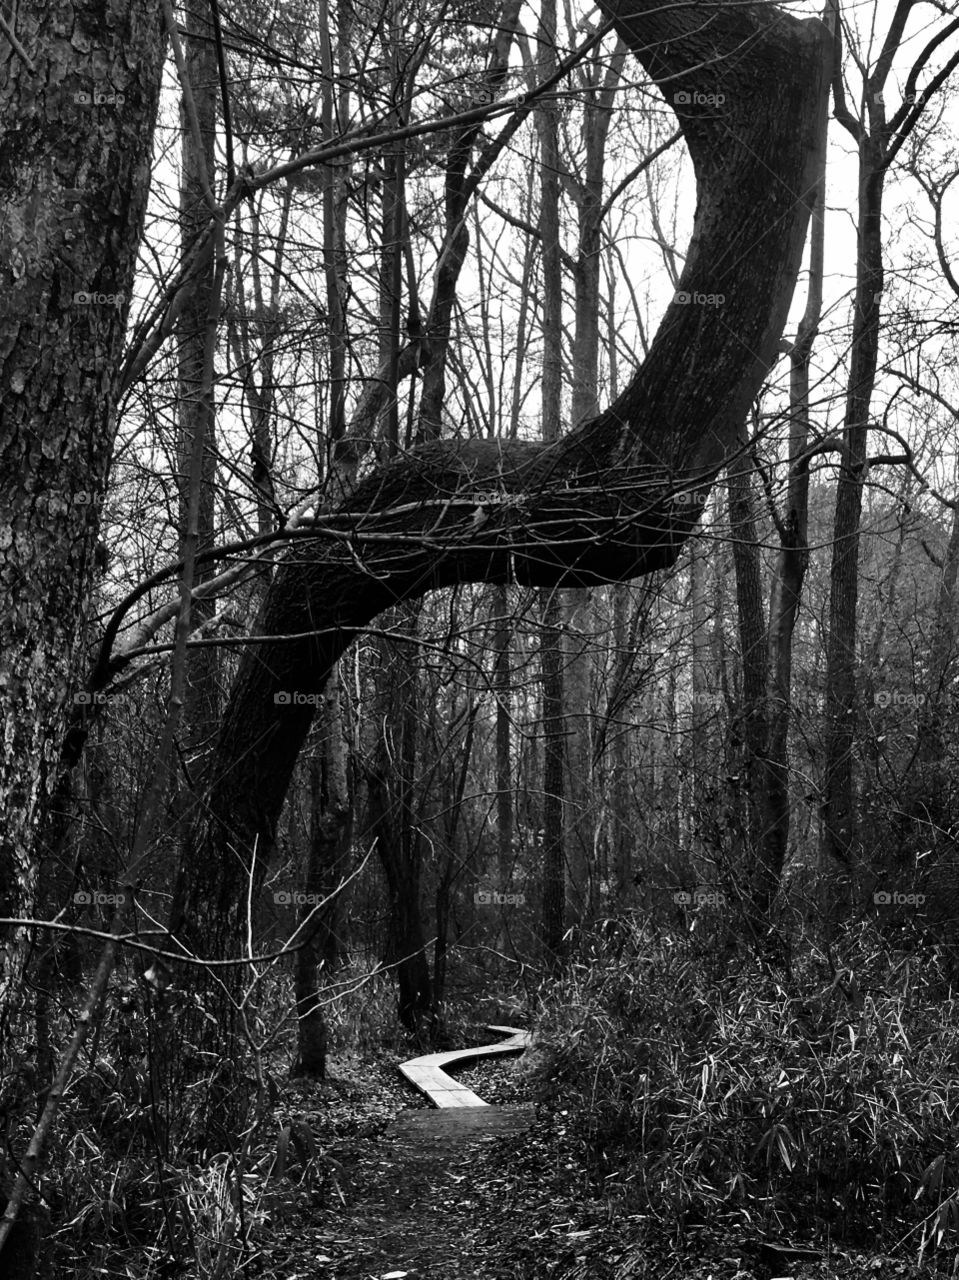 Black and white image of an old boarded path and what resembled a Native American signal tree